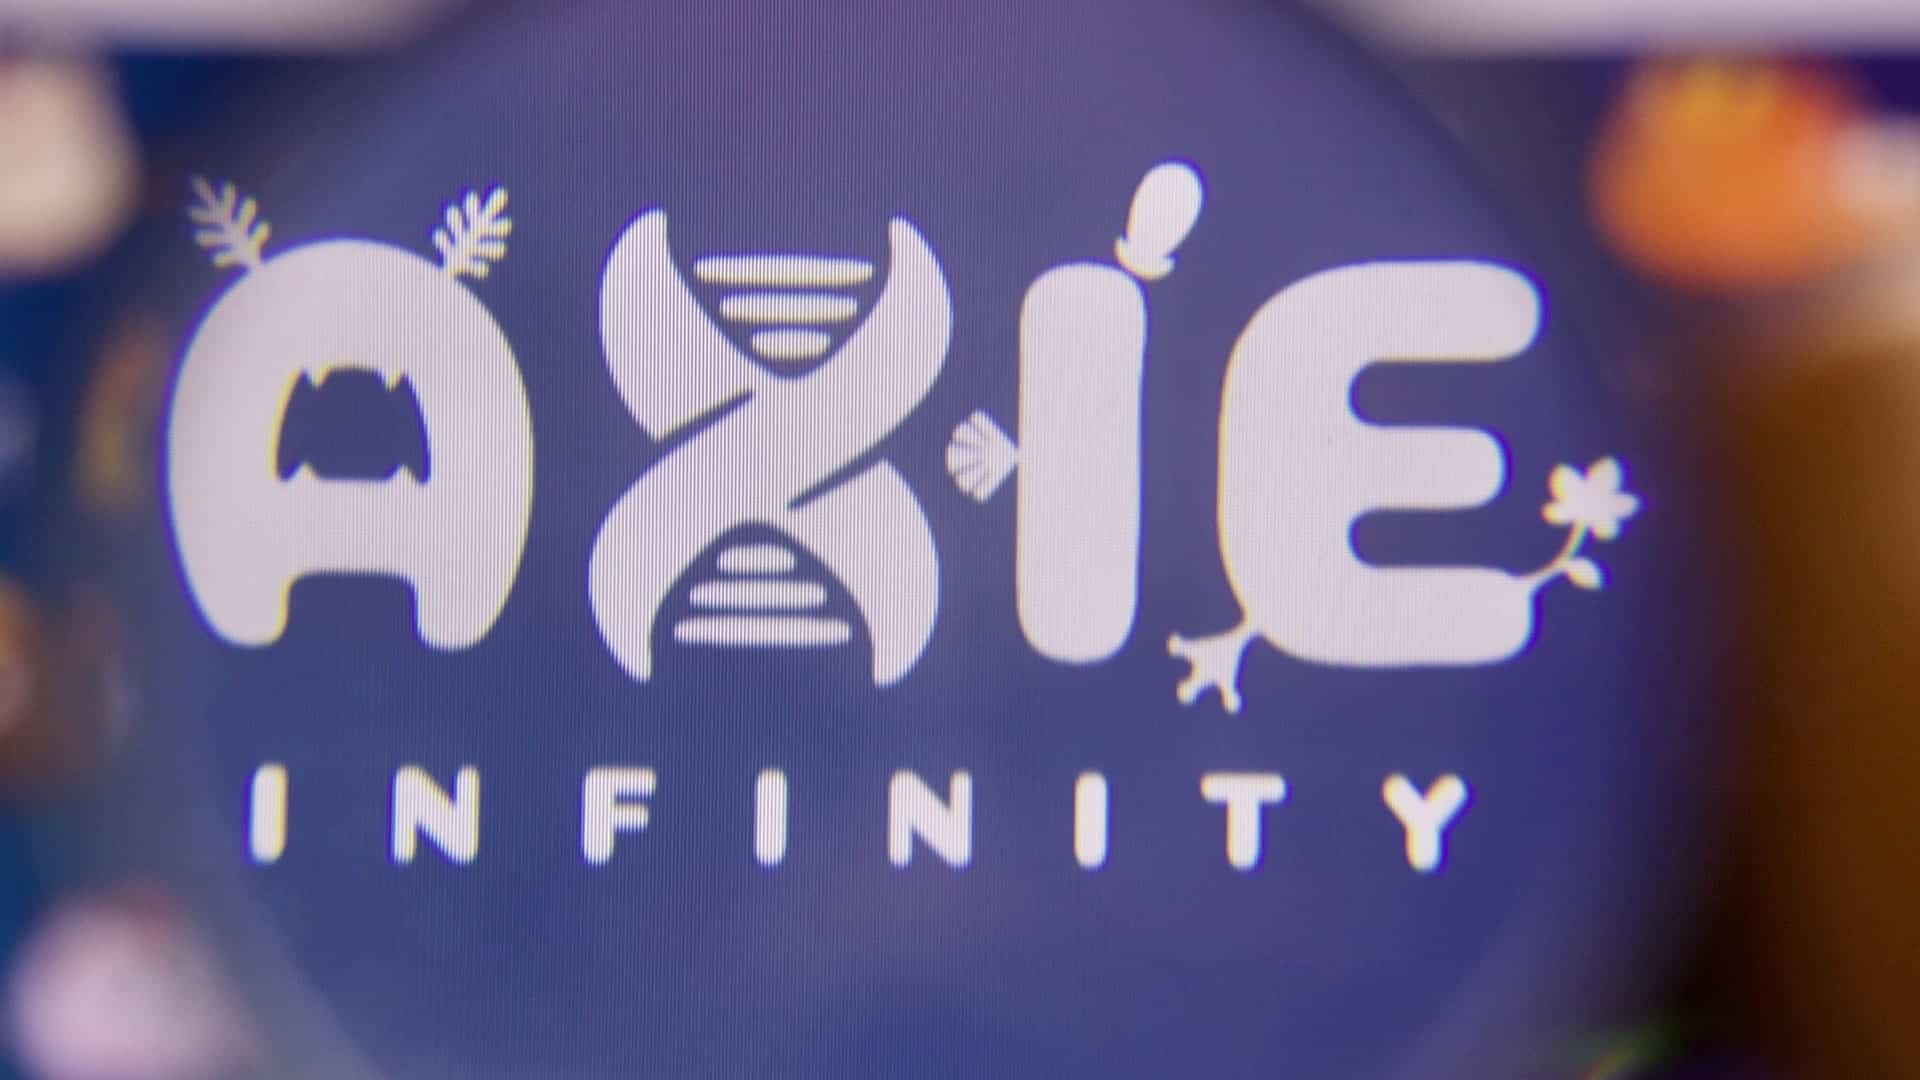 The NFT game Axie Infinity runs a staking program with its own AXS token